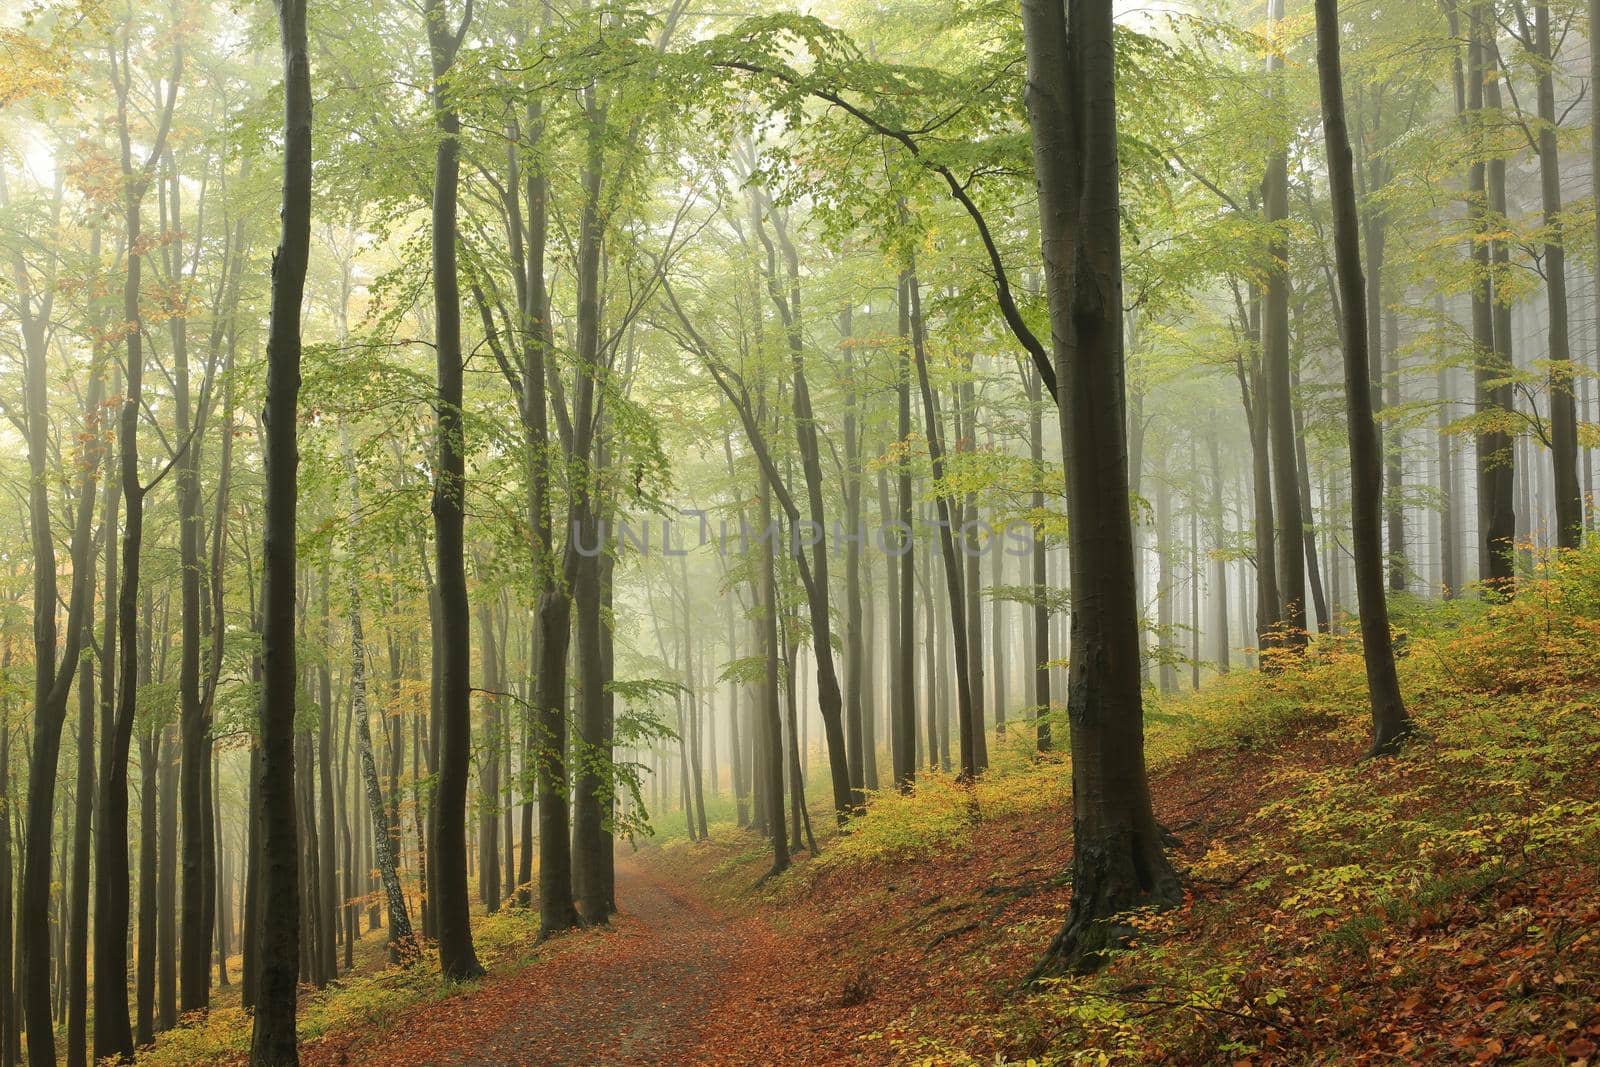 Autumn forest in the fog by nature78